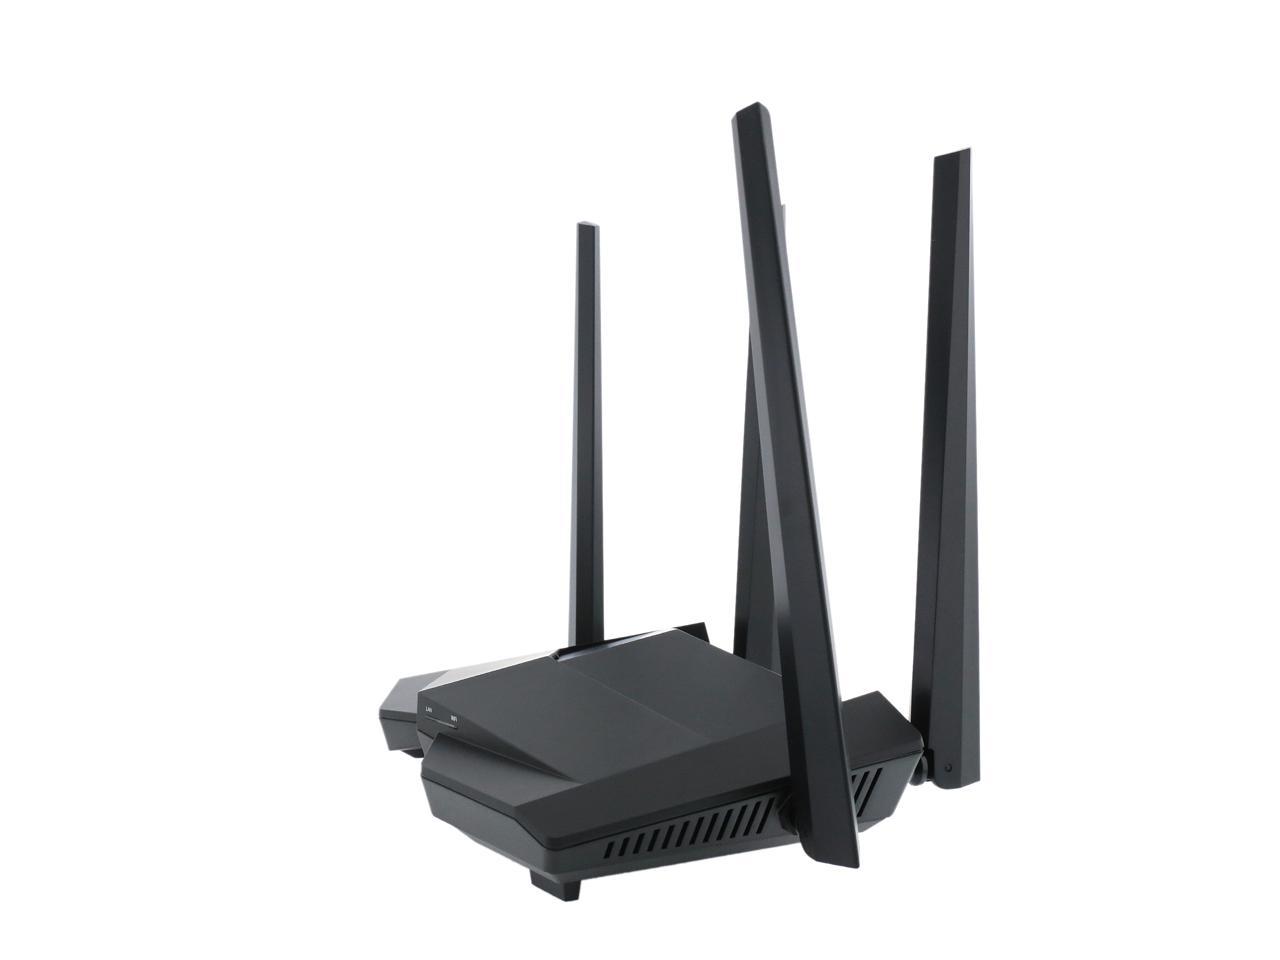 AC10U 1200MBPSDUALBAND Router PERP 